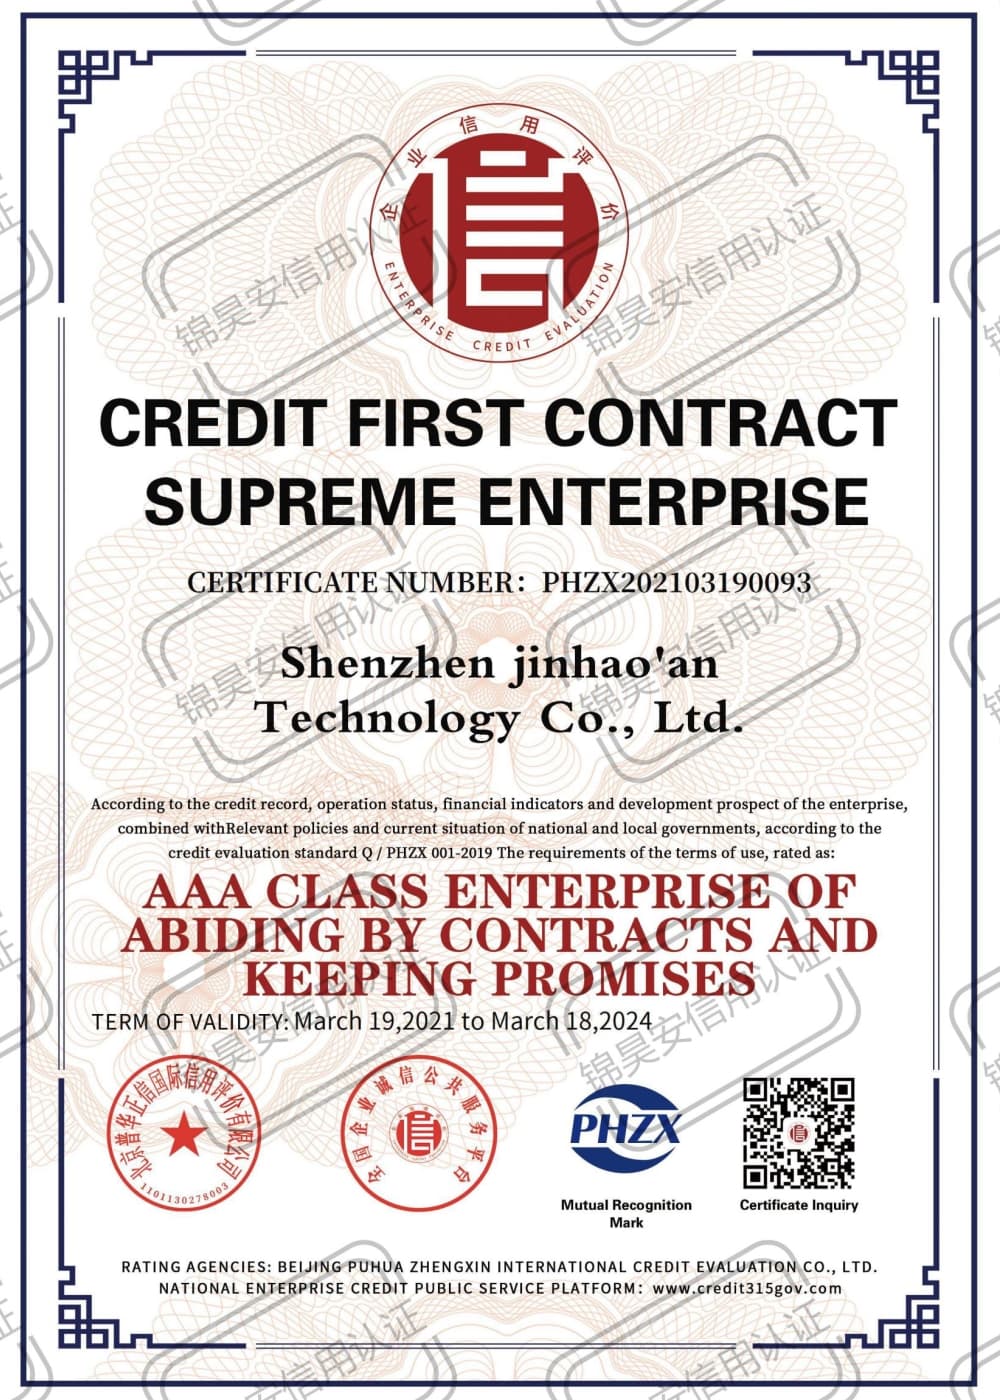 Credit First Contract Supreme Enterprise